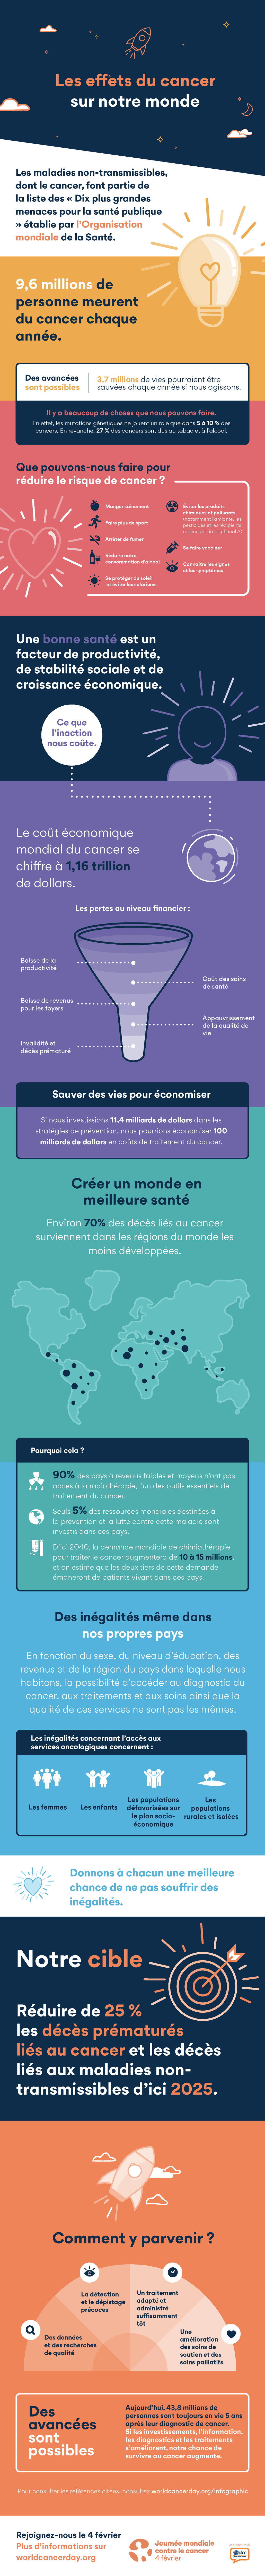 Cancer infographie